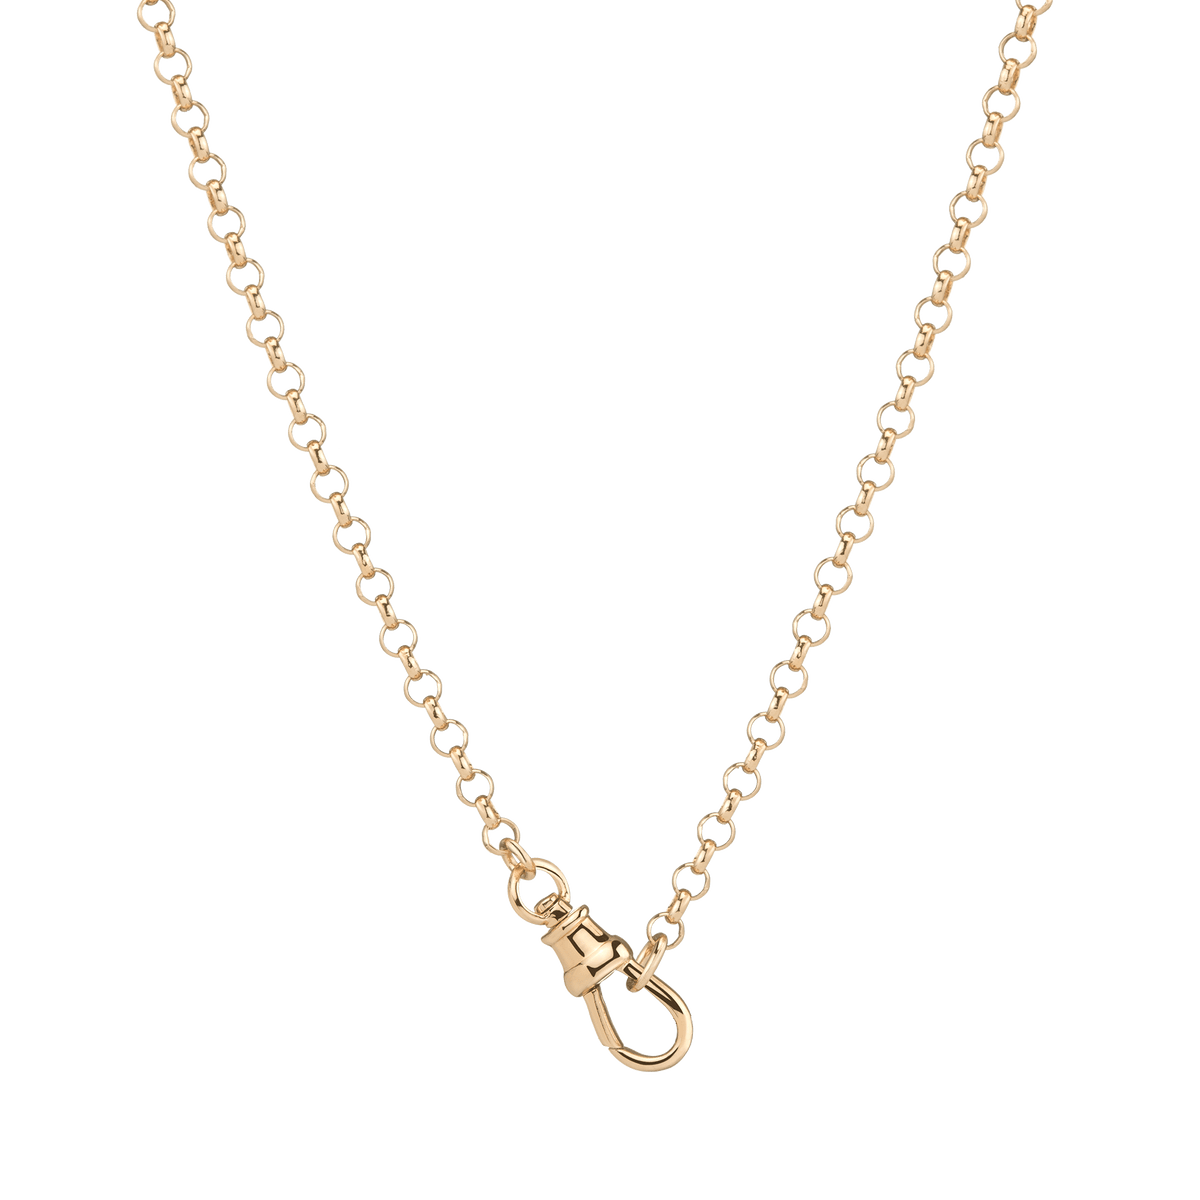 Sal + Haven - Necklace Accessories - Layered Necklace Clasp